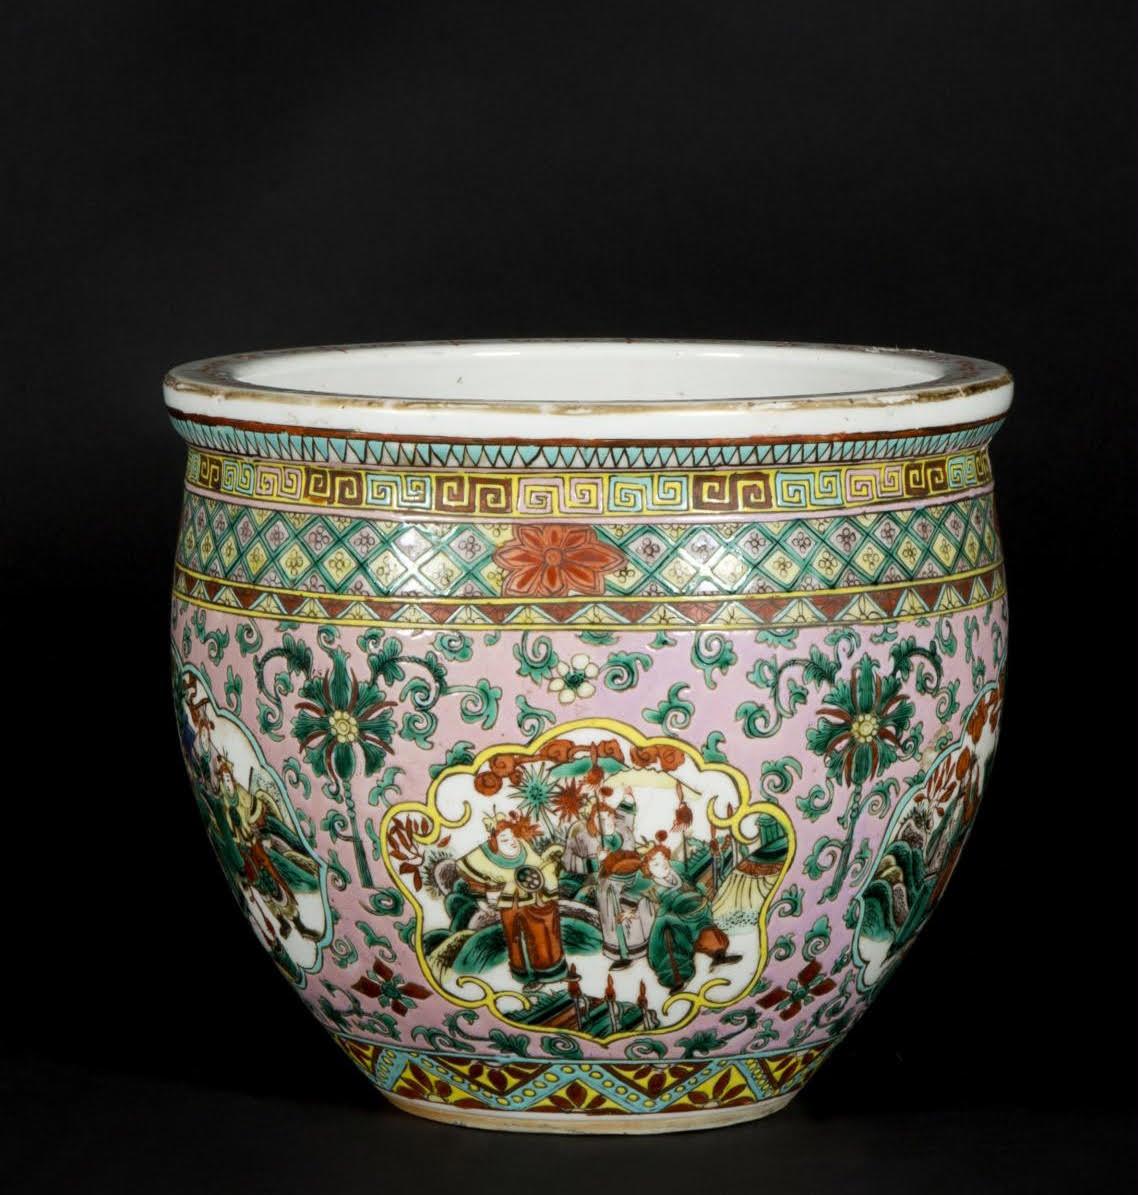 Chinese Export Canton Porcelain Cache Pot, 20th century.